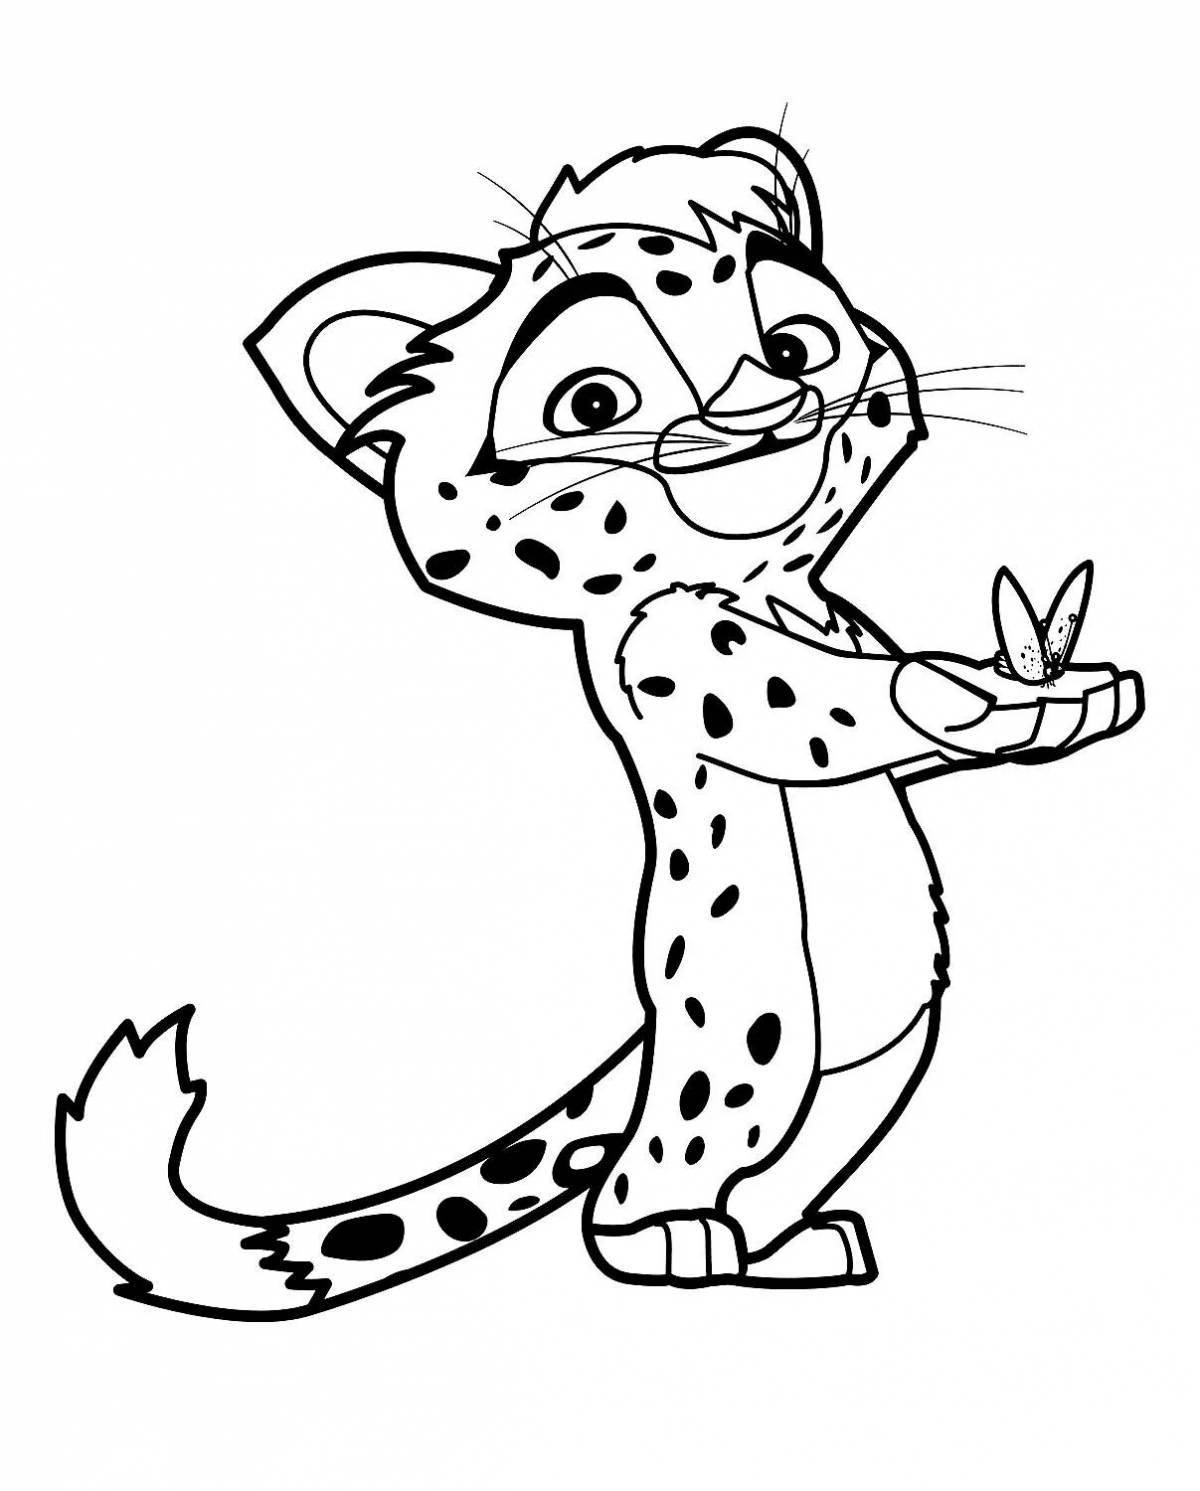 Outstanding tick and leo coloring page